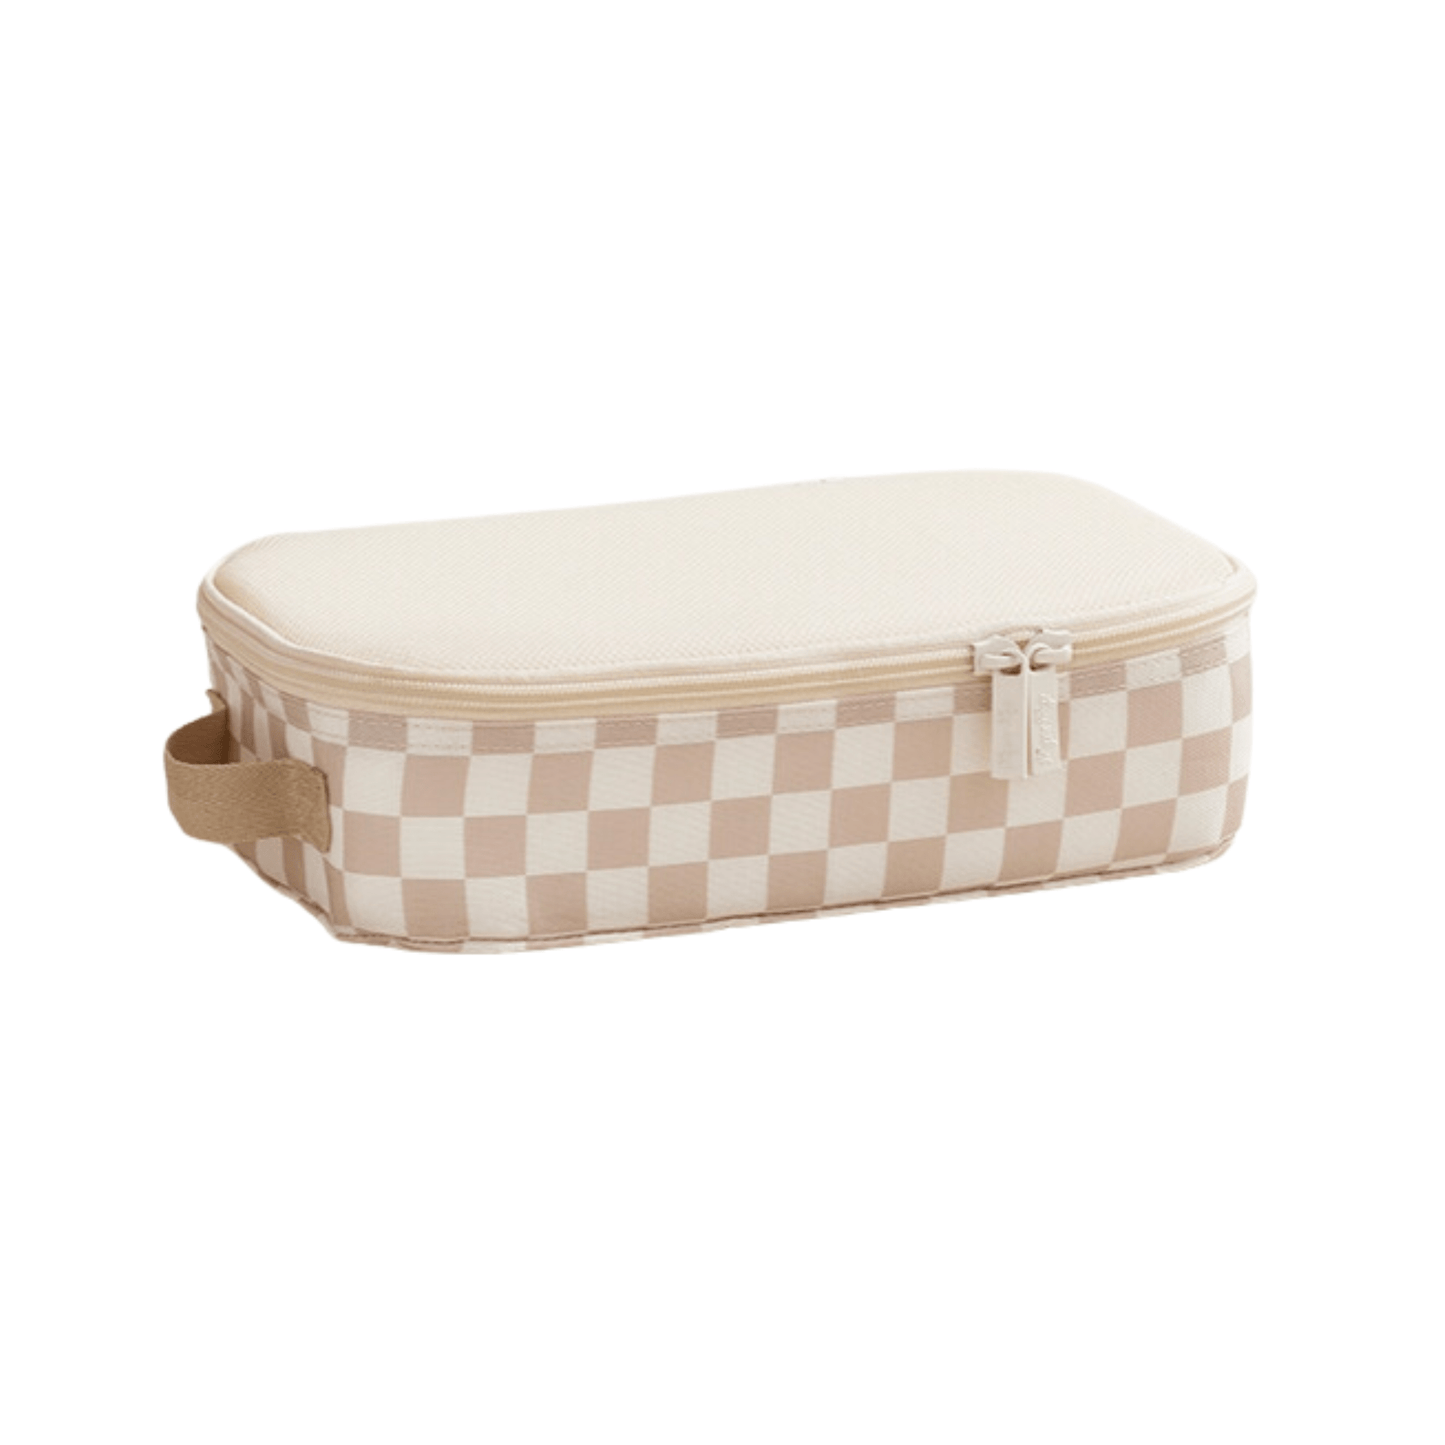 Itzy Ritzy Packing Cubes - Set of 3 Packing Cubes & Travel Diaper Bag Organizer Taupe Checkerboard